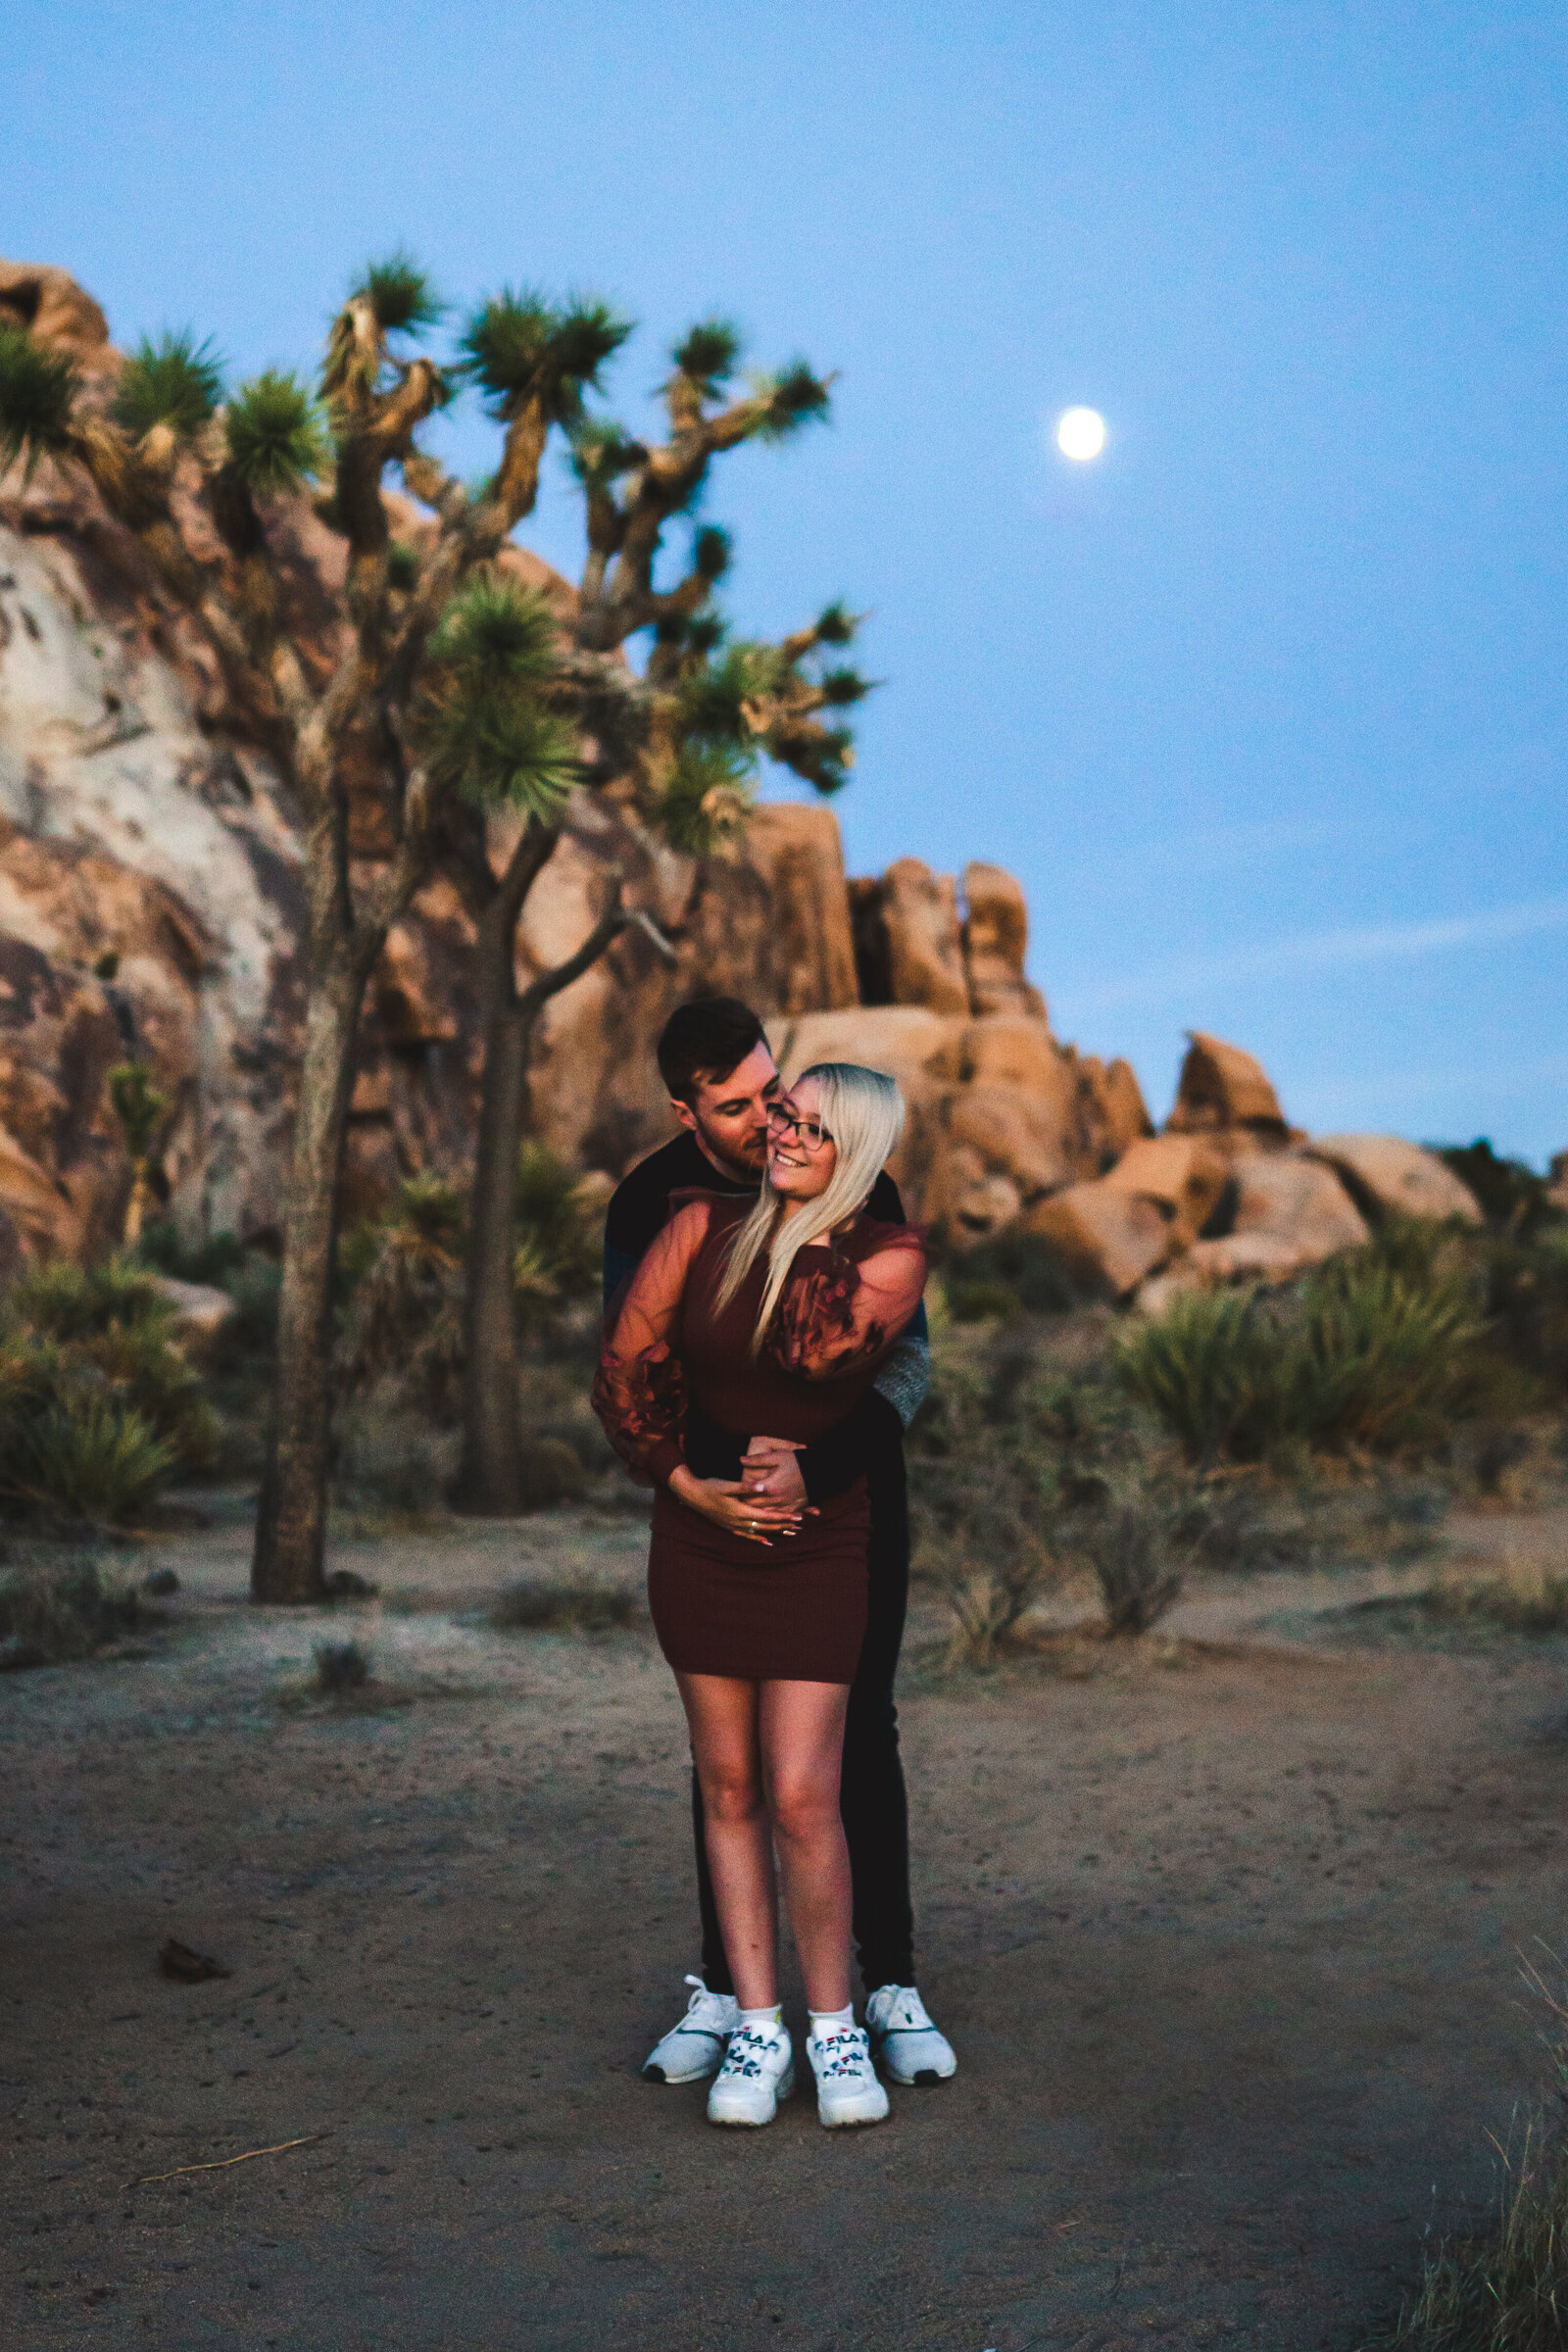 Couple holding each other, man kissing woman on cheek, with Joshua Trees behind them and moon rising.